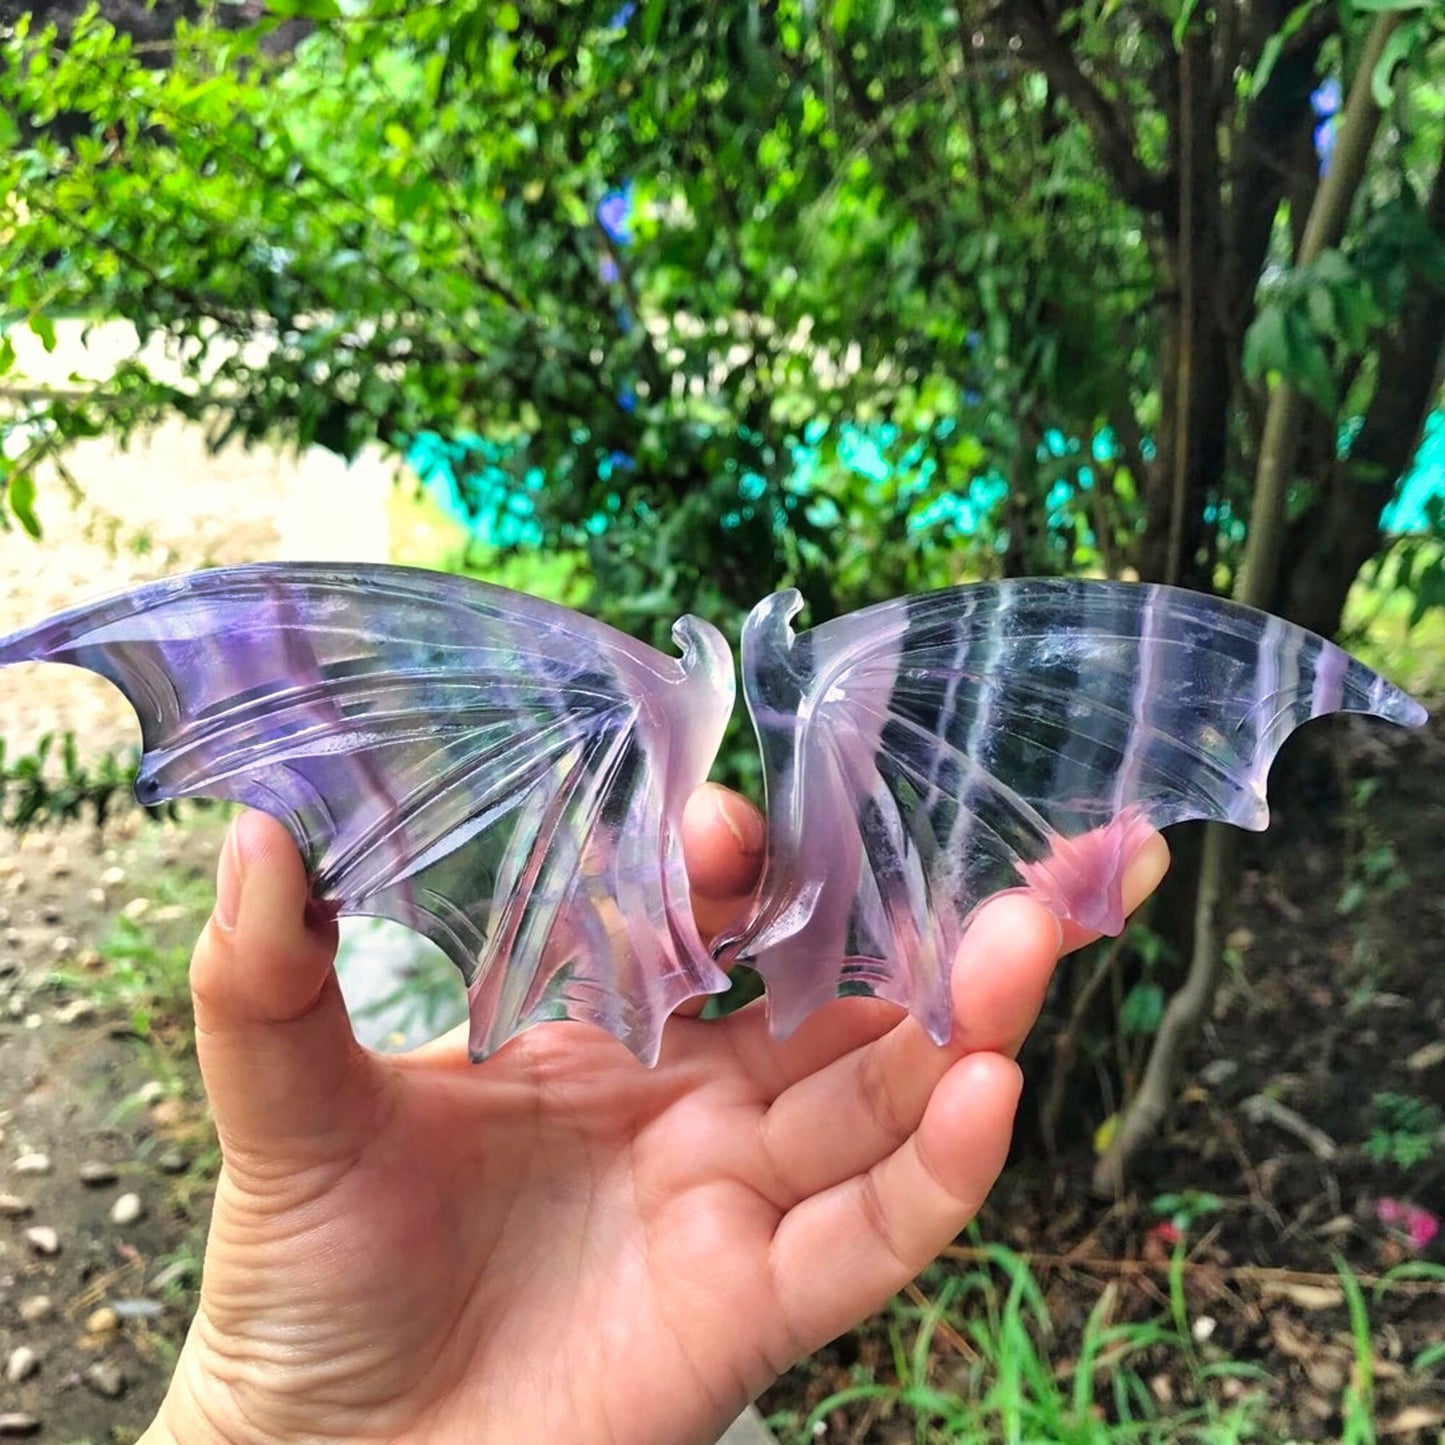 Natural Crystal Carving Fluorite Bat Wing Crafts - Healing Gemstone for Gifts, Home Ornament and Decoration (1 Pair)